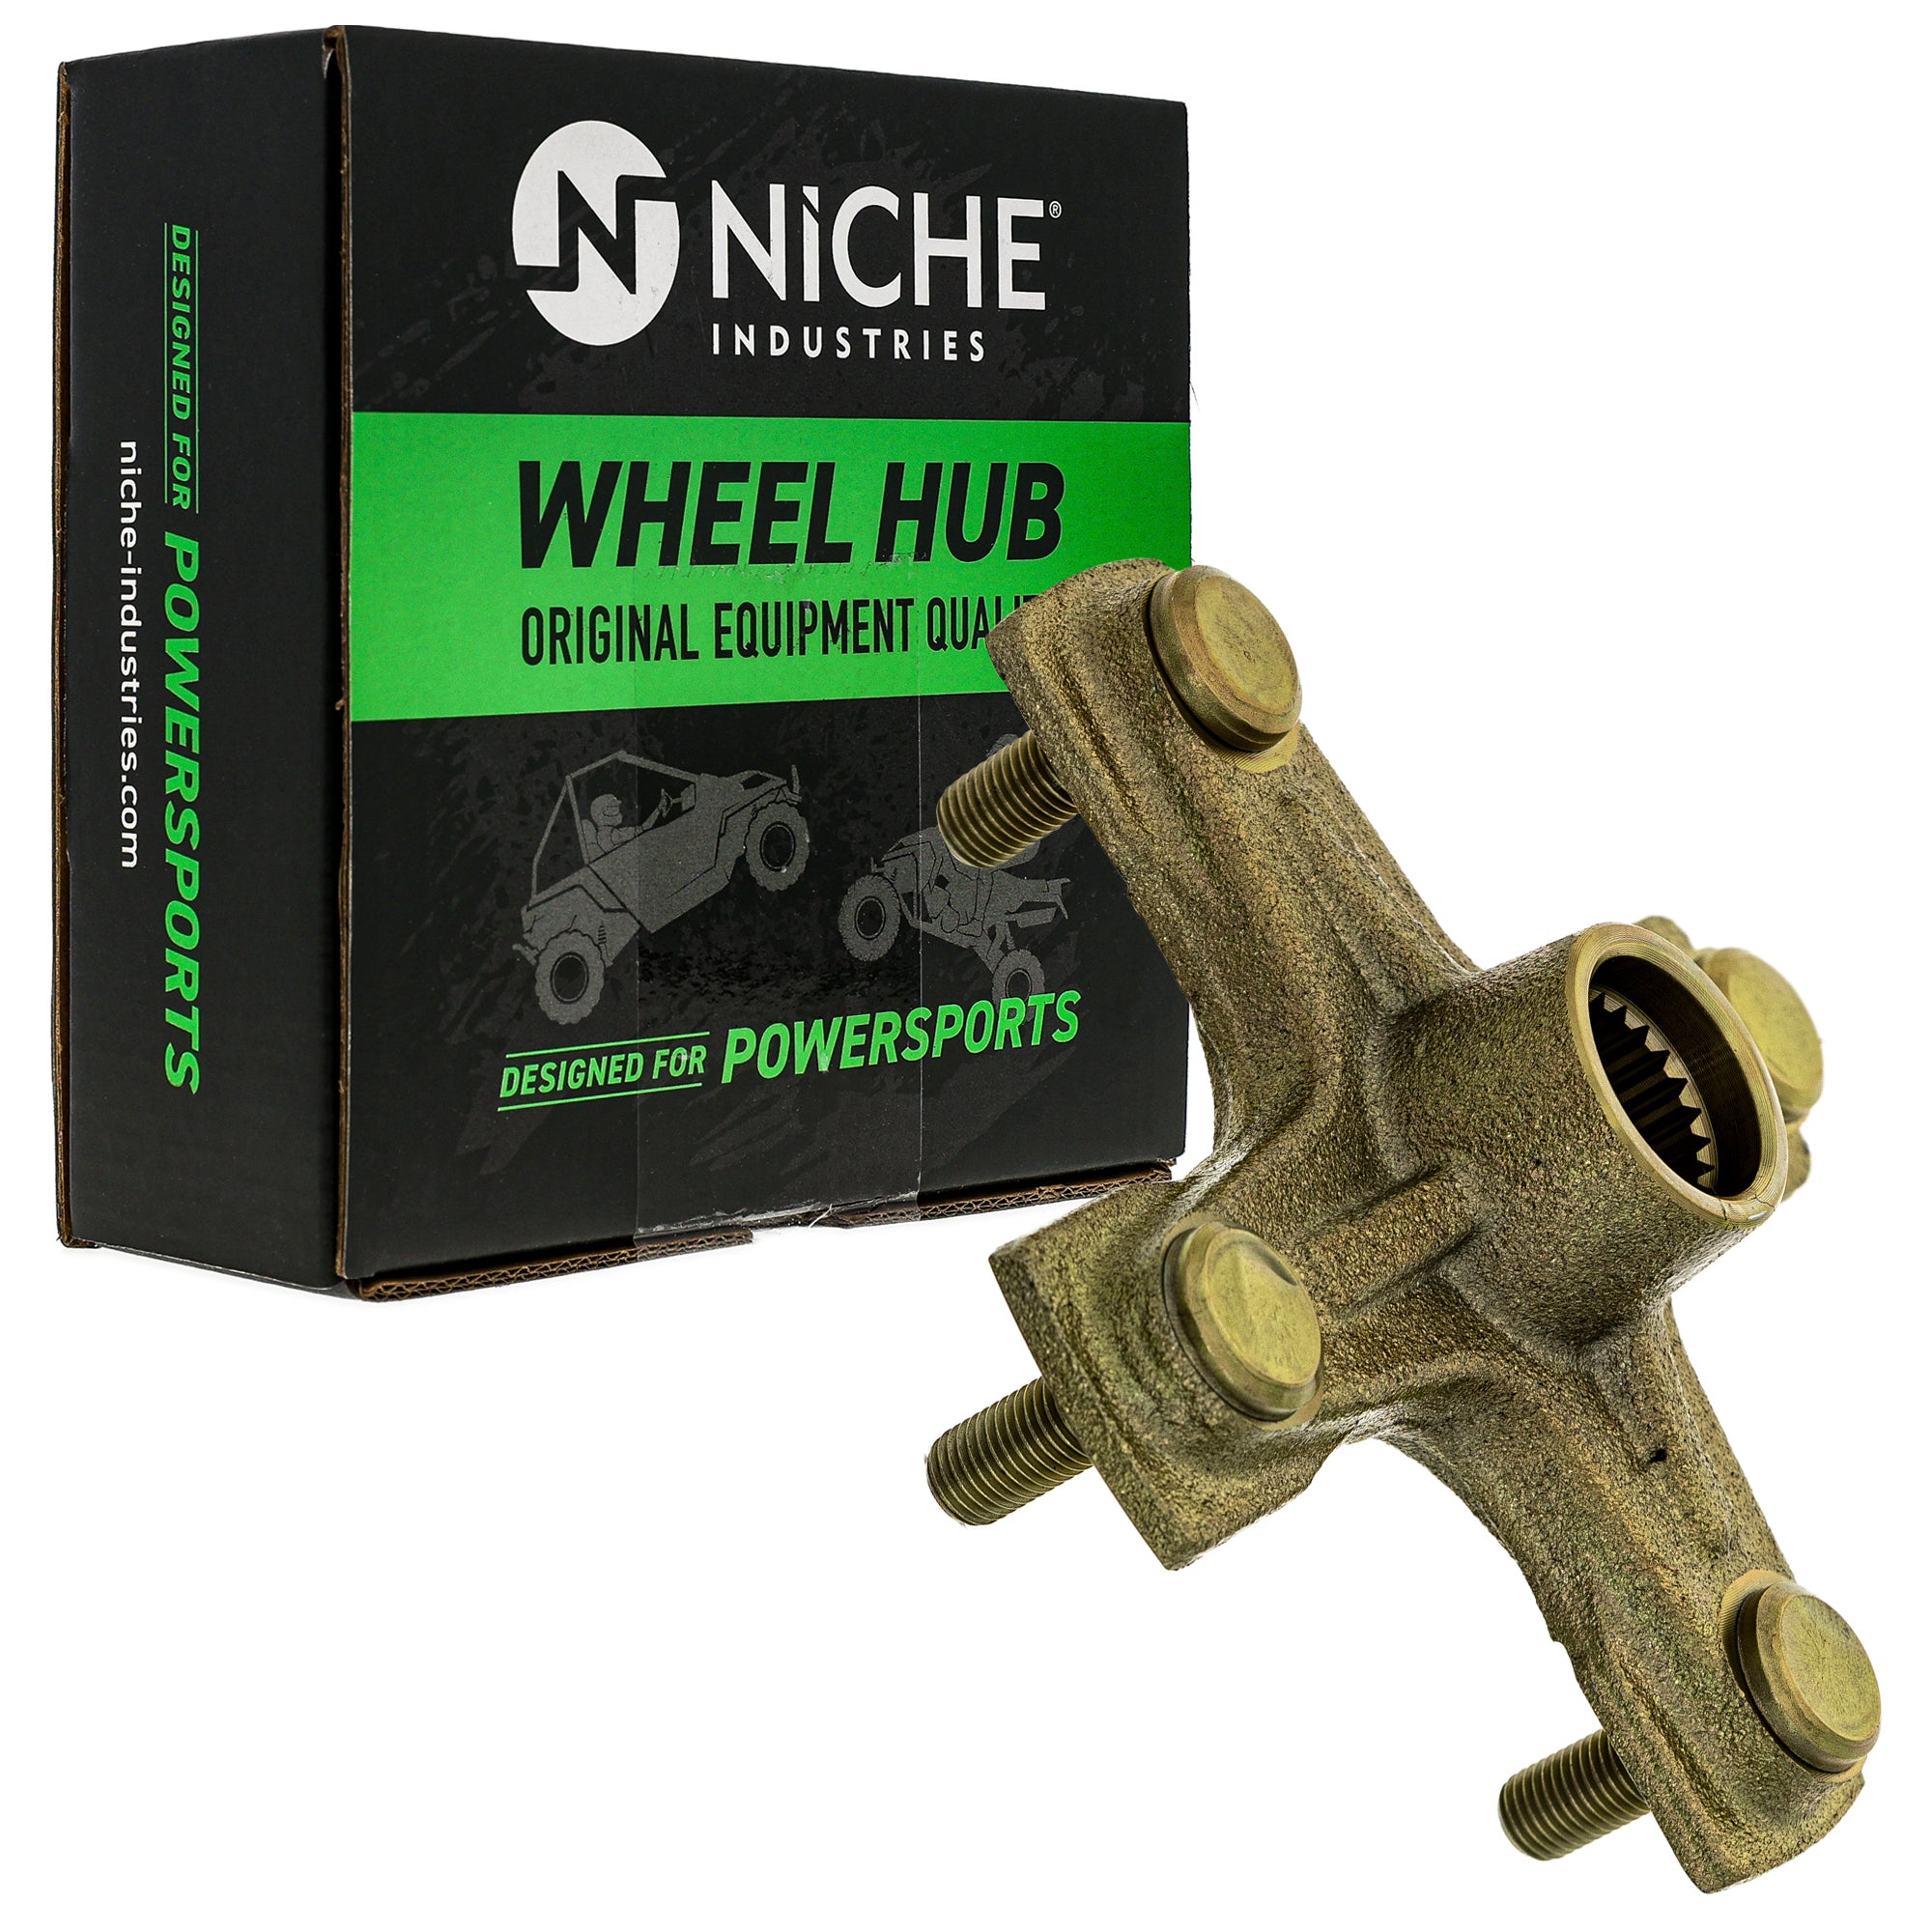 NICHE 519-CWH-2227B Wheel Hub Set 2-Pack for zOTHER